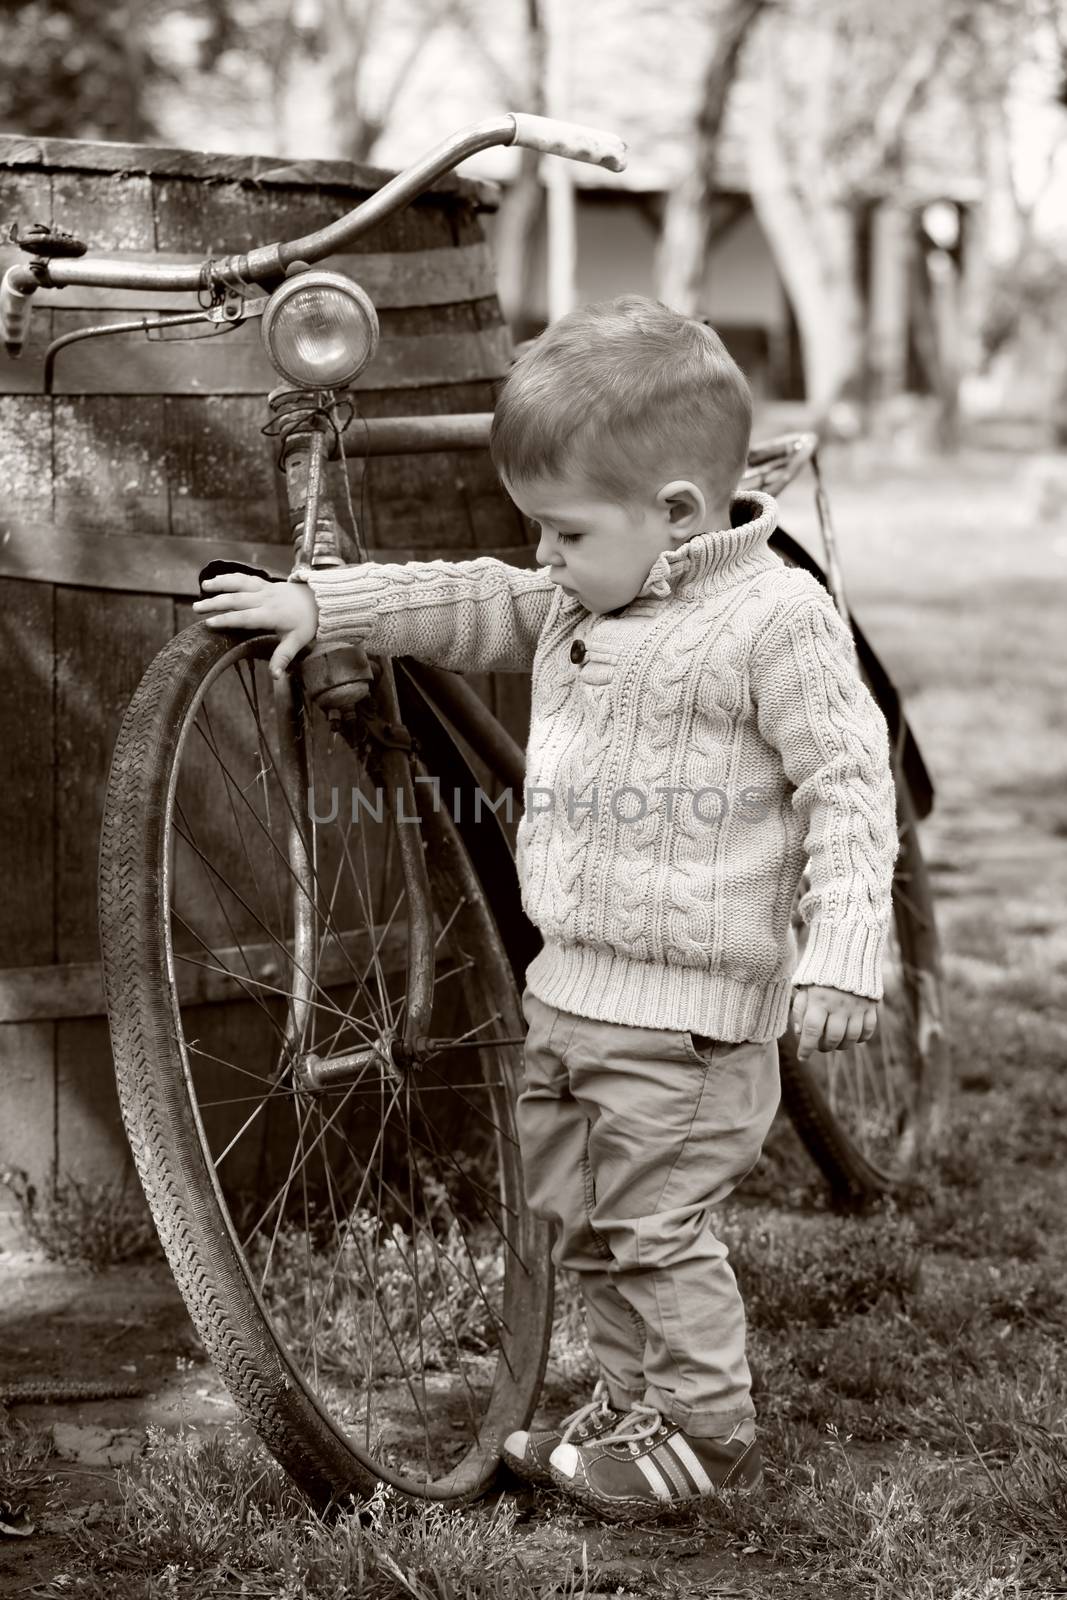 2 years old curious Baby boy walking around the old bike on sepia brown color